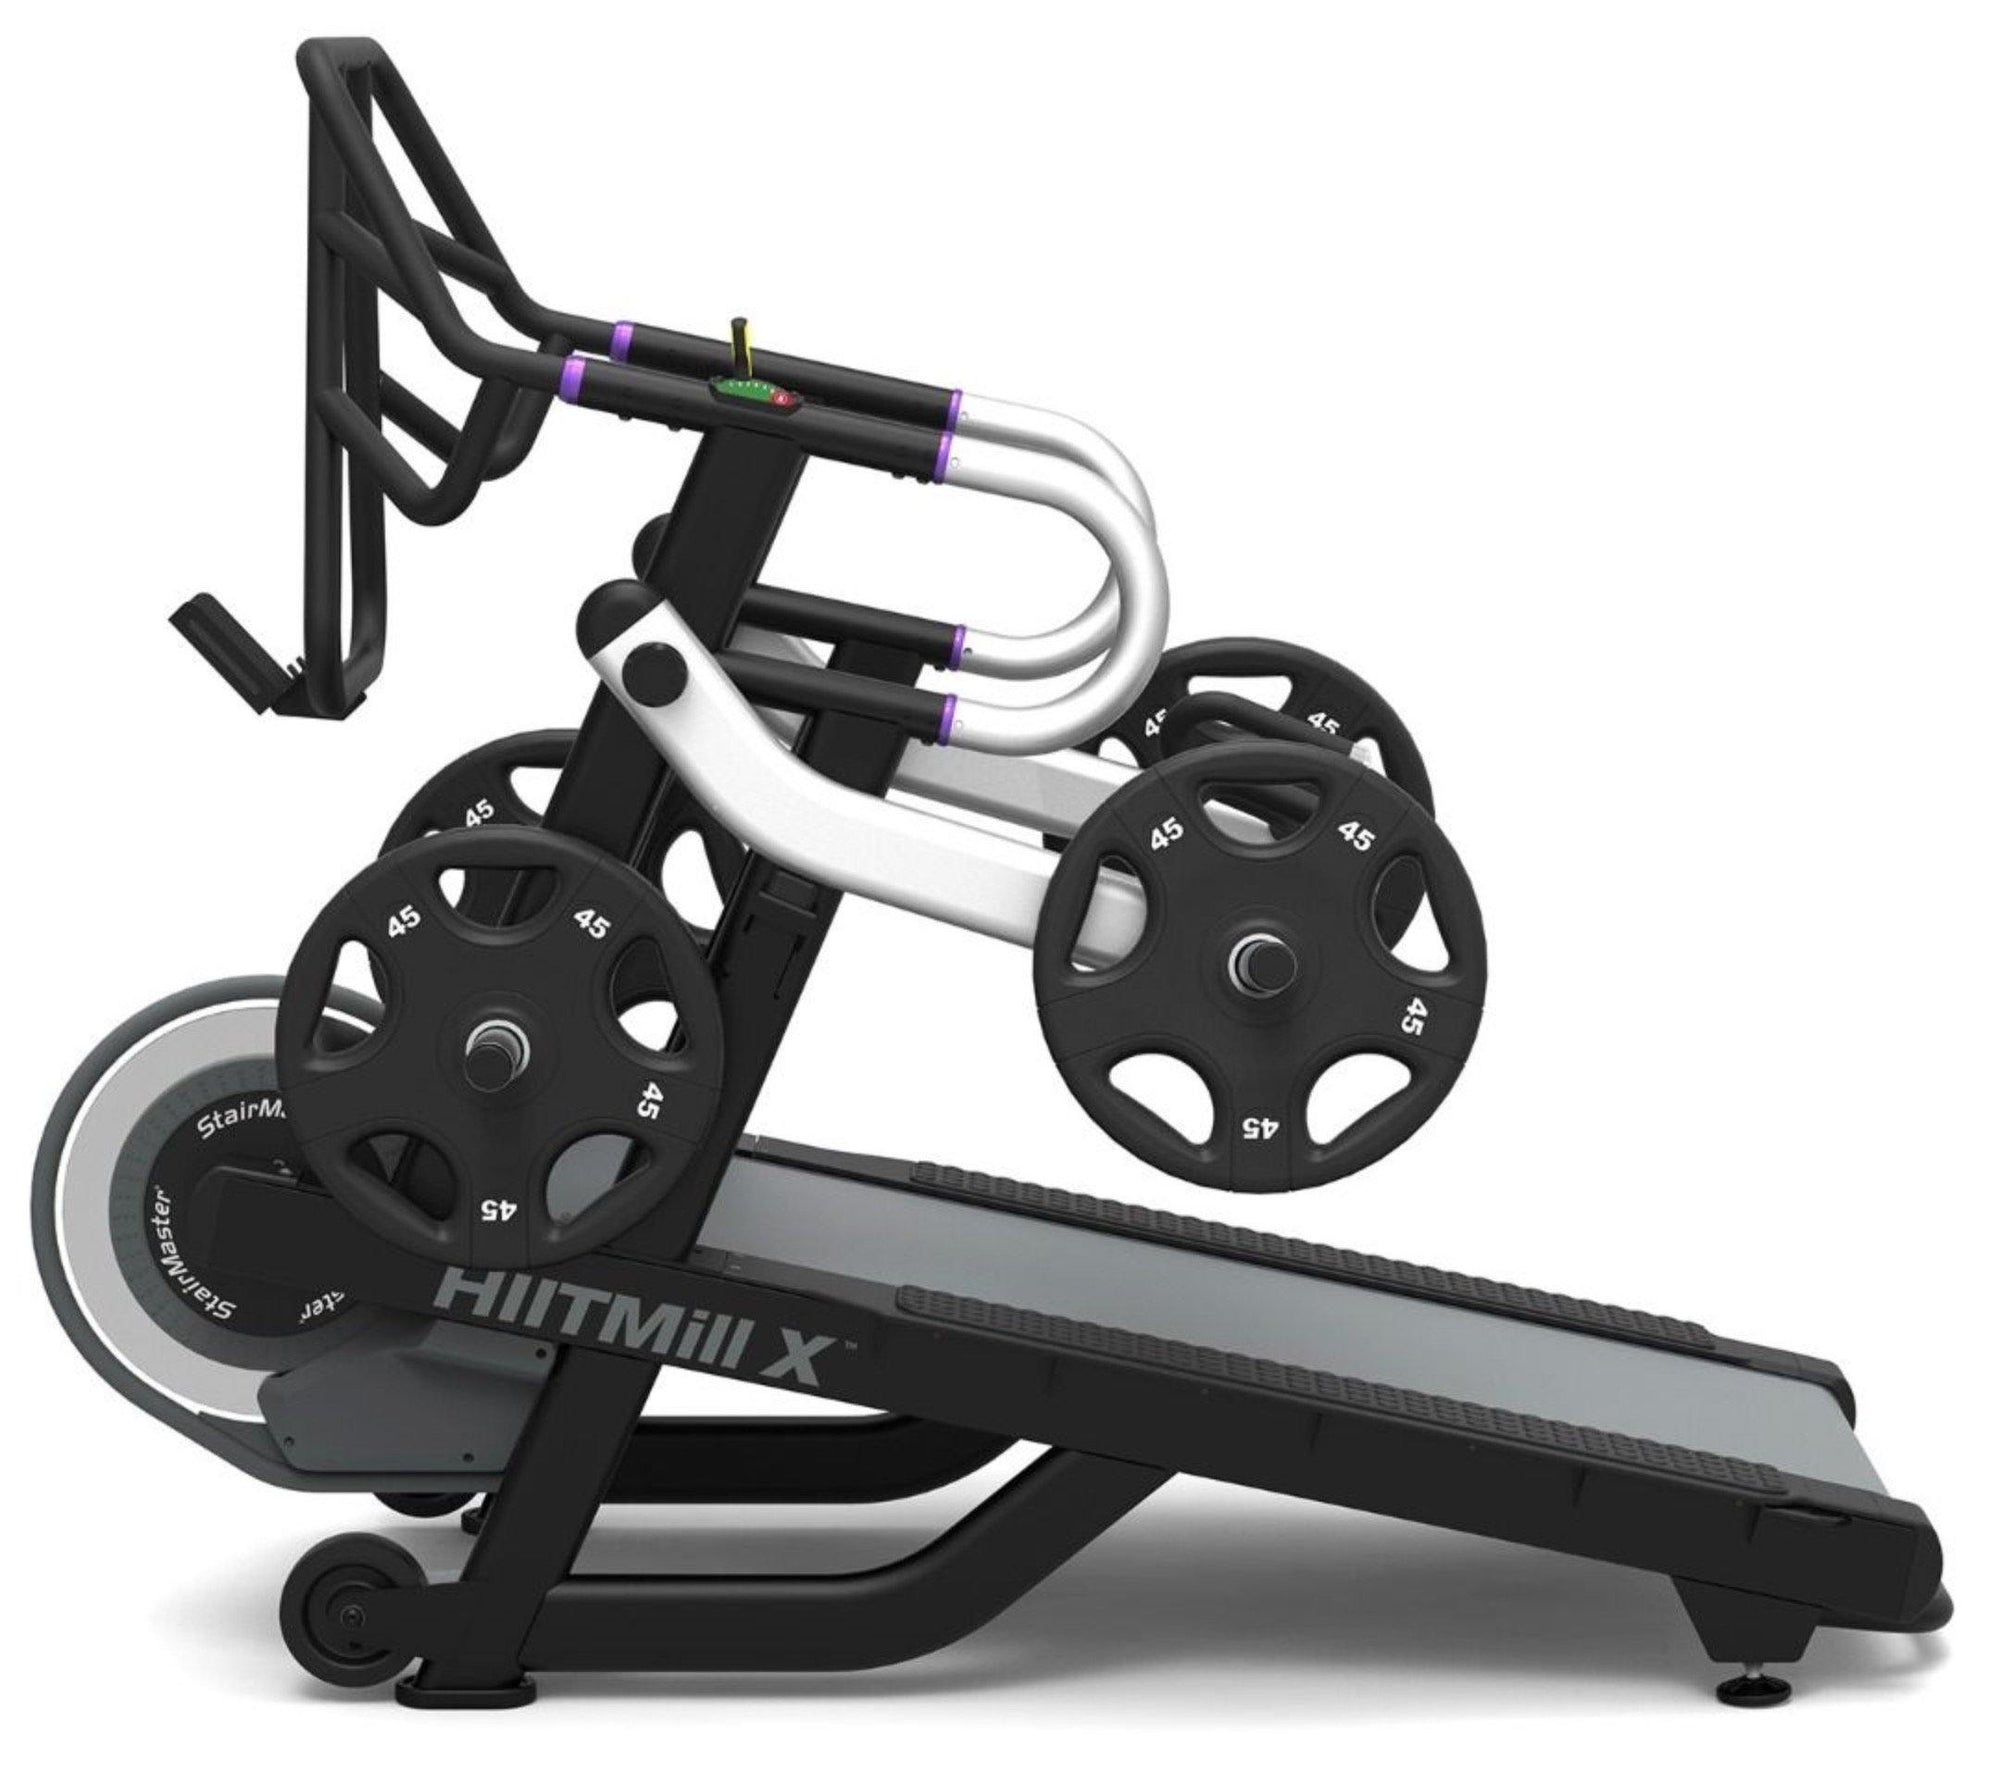 StairMaster HIITmillX - Including Console